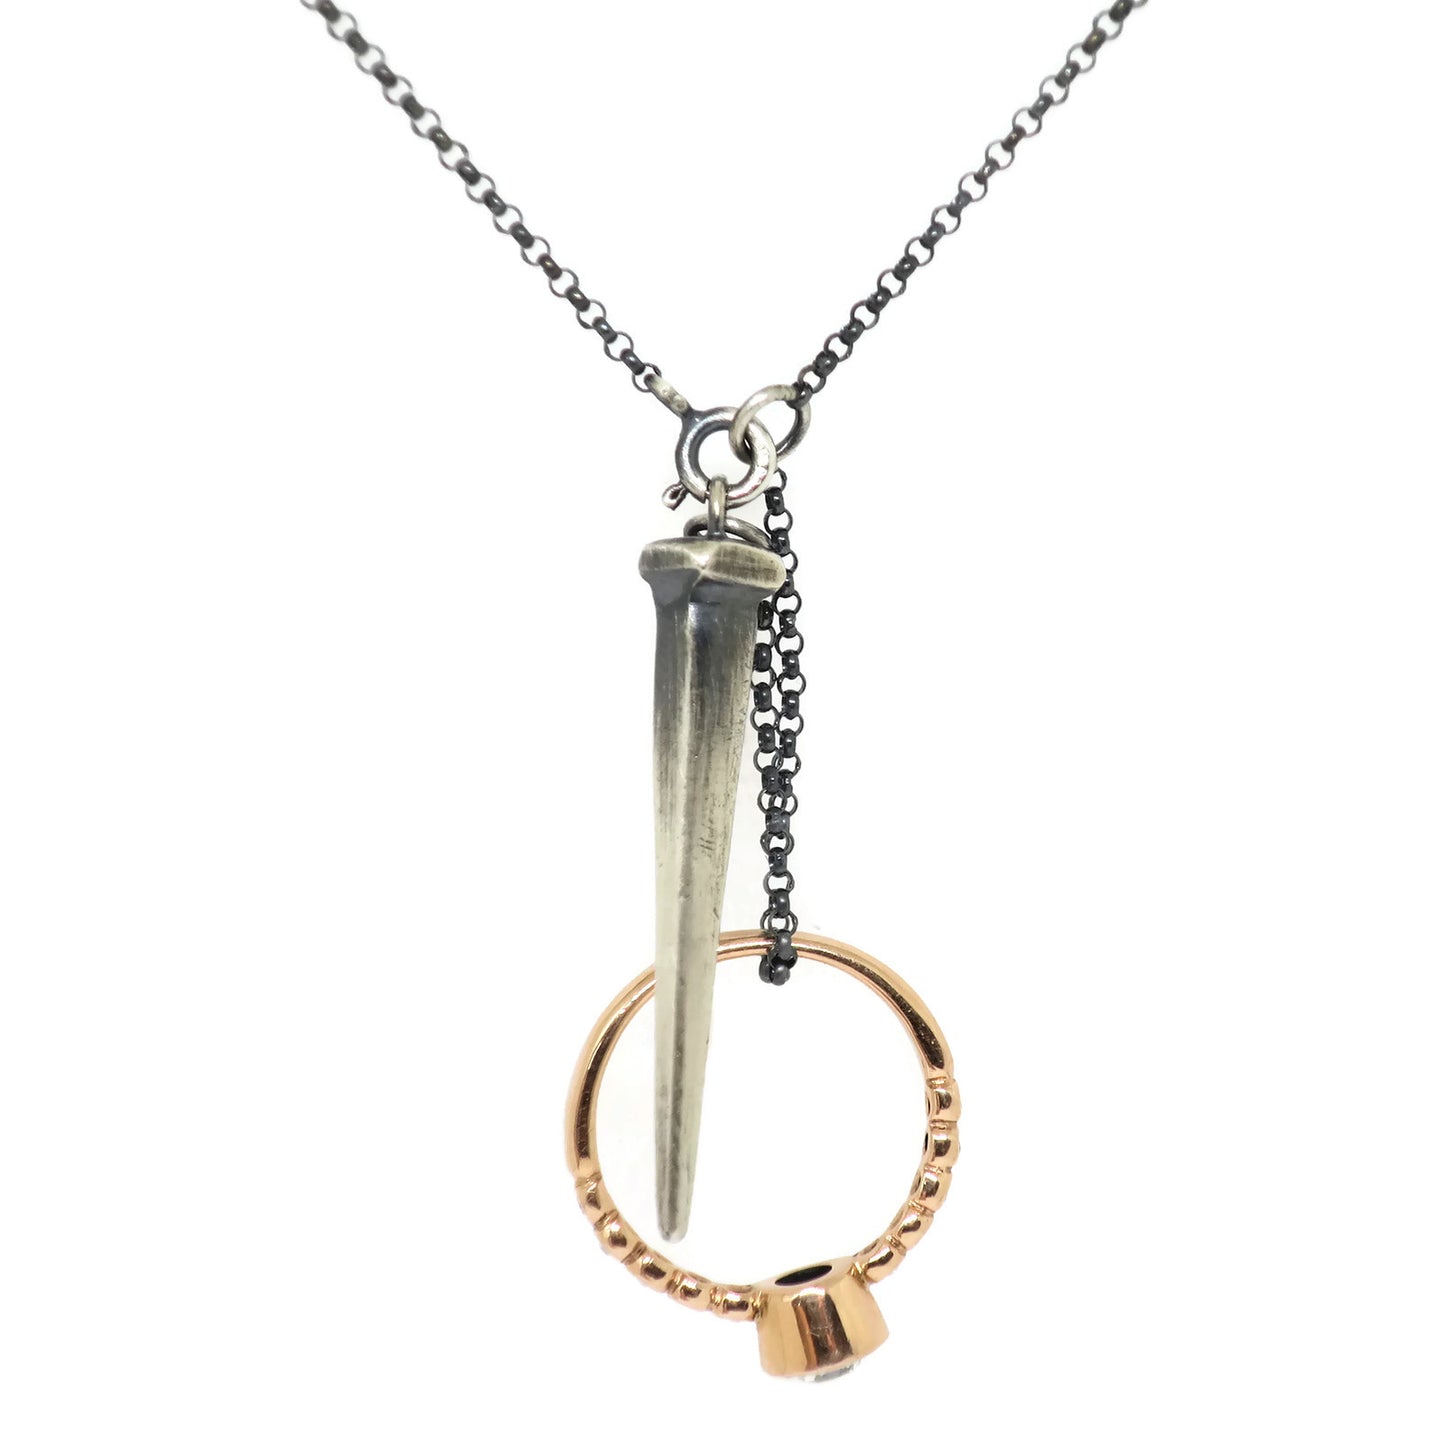 Ring Keeper Necklace- Nail